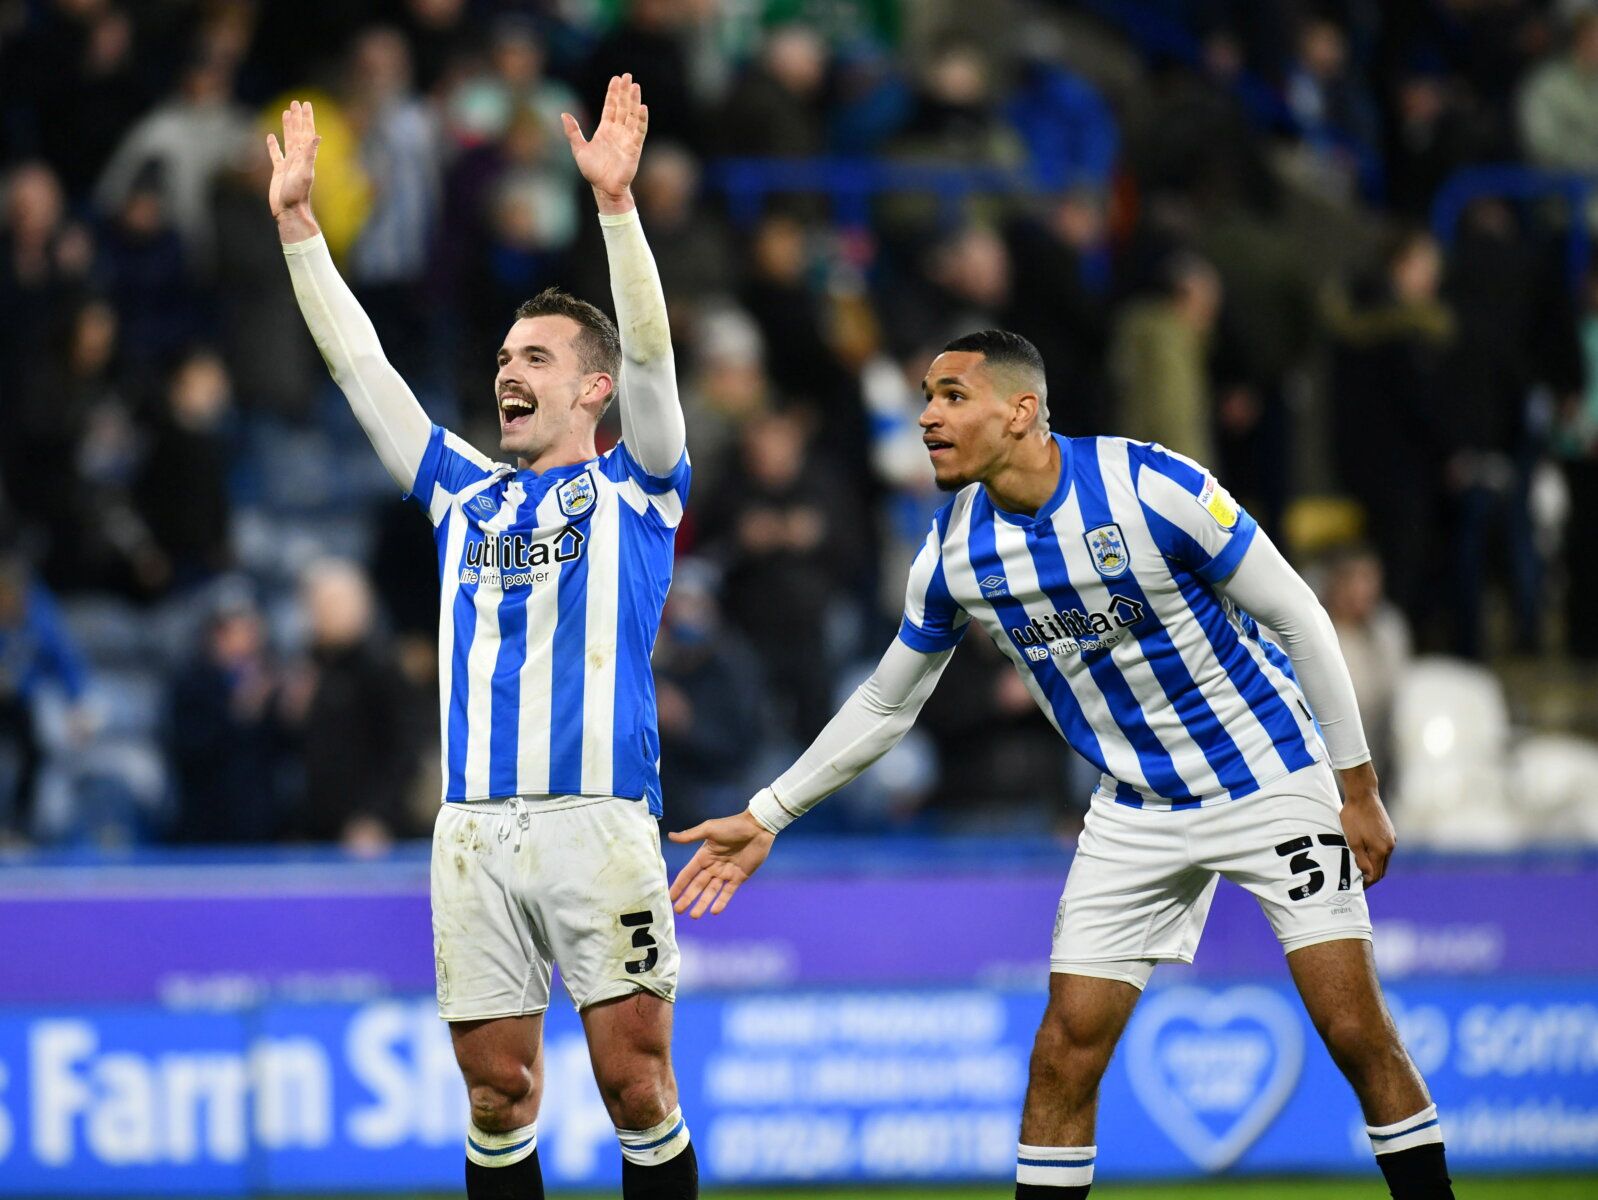 Soccer Football - Championship - Huddersfield Town v West Bromwich Albion - John Smith's Stadium, Huddersfield, Britain - November 20, 2021 Huddersfield Town's Harry Toffolo and Jon Russell celebrates after the match         Paul Burrows/Action Images